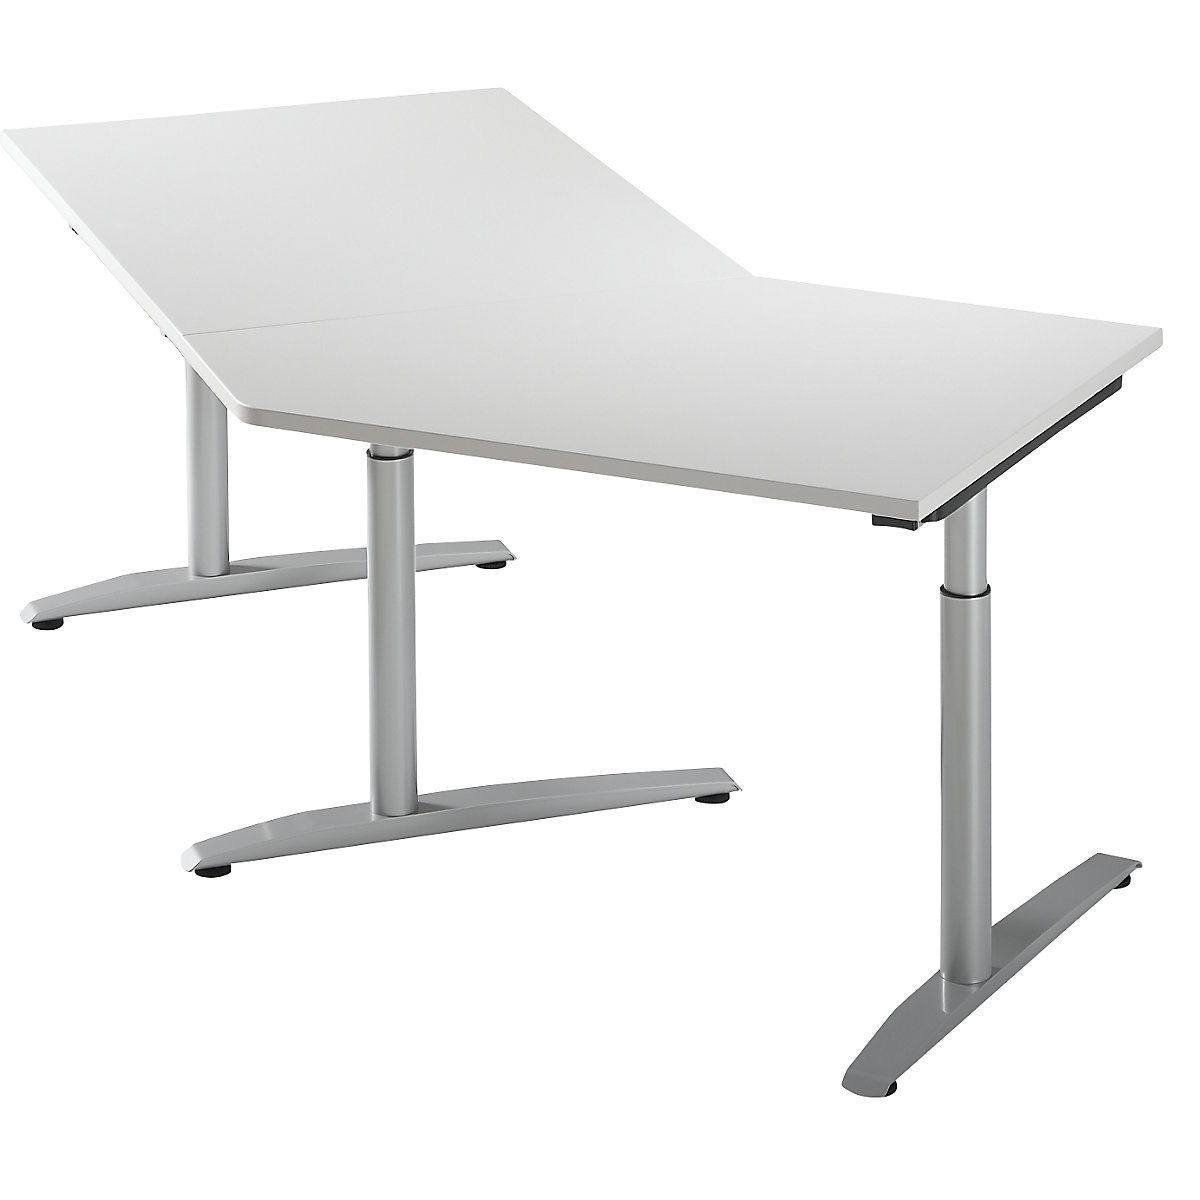 Add-on table, height adjustable from 680 - 820 mm HANNA